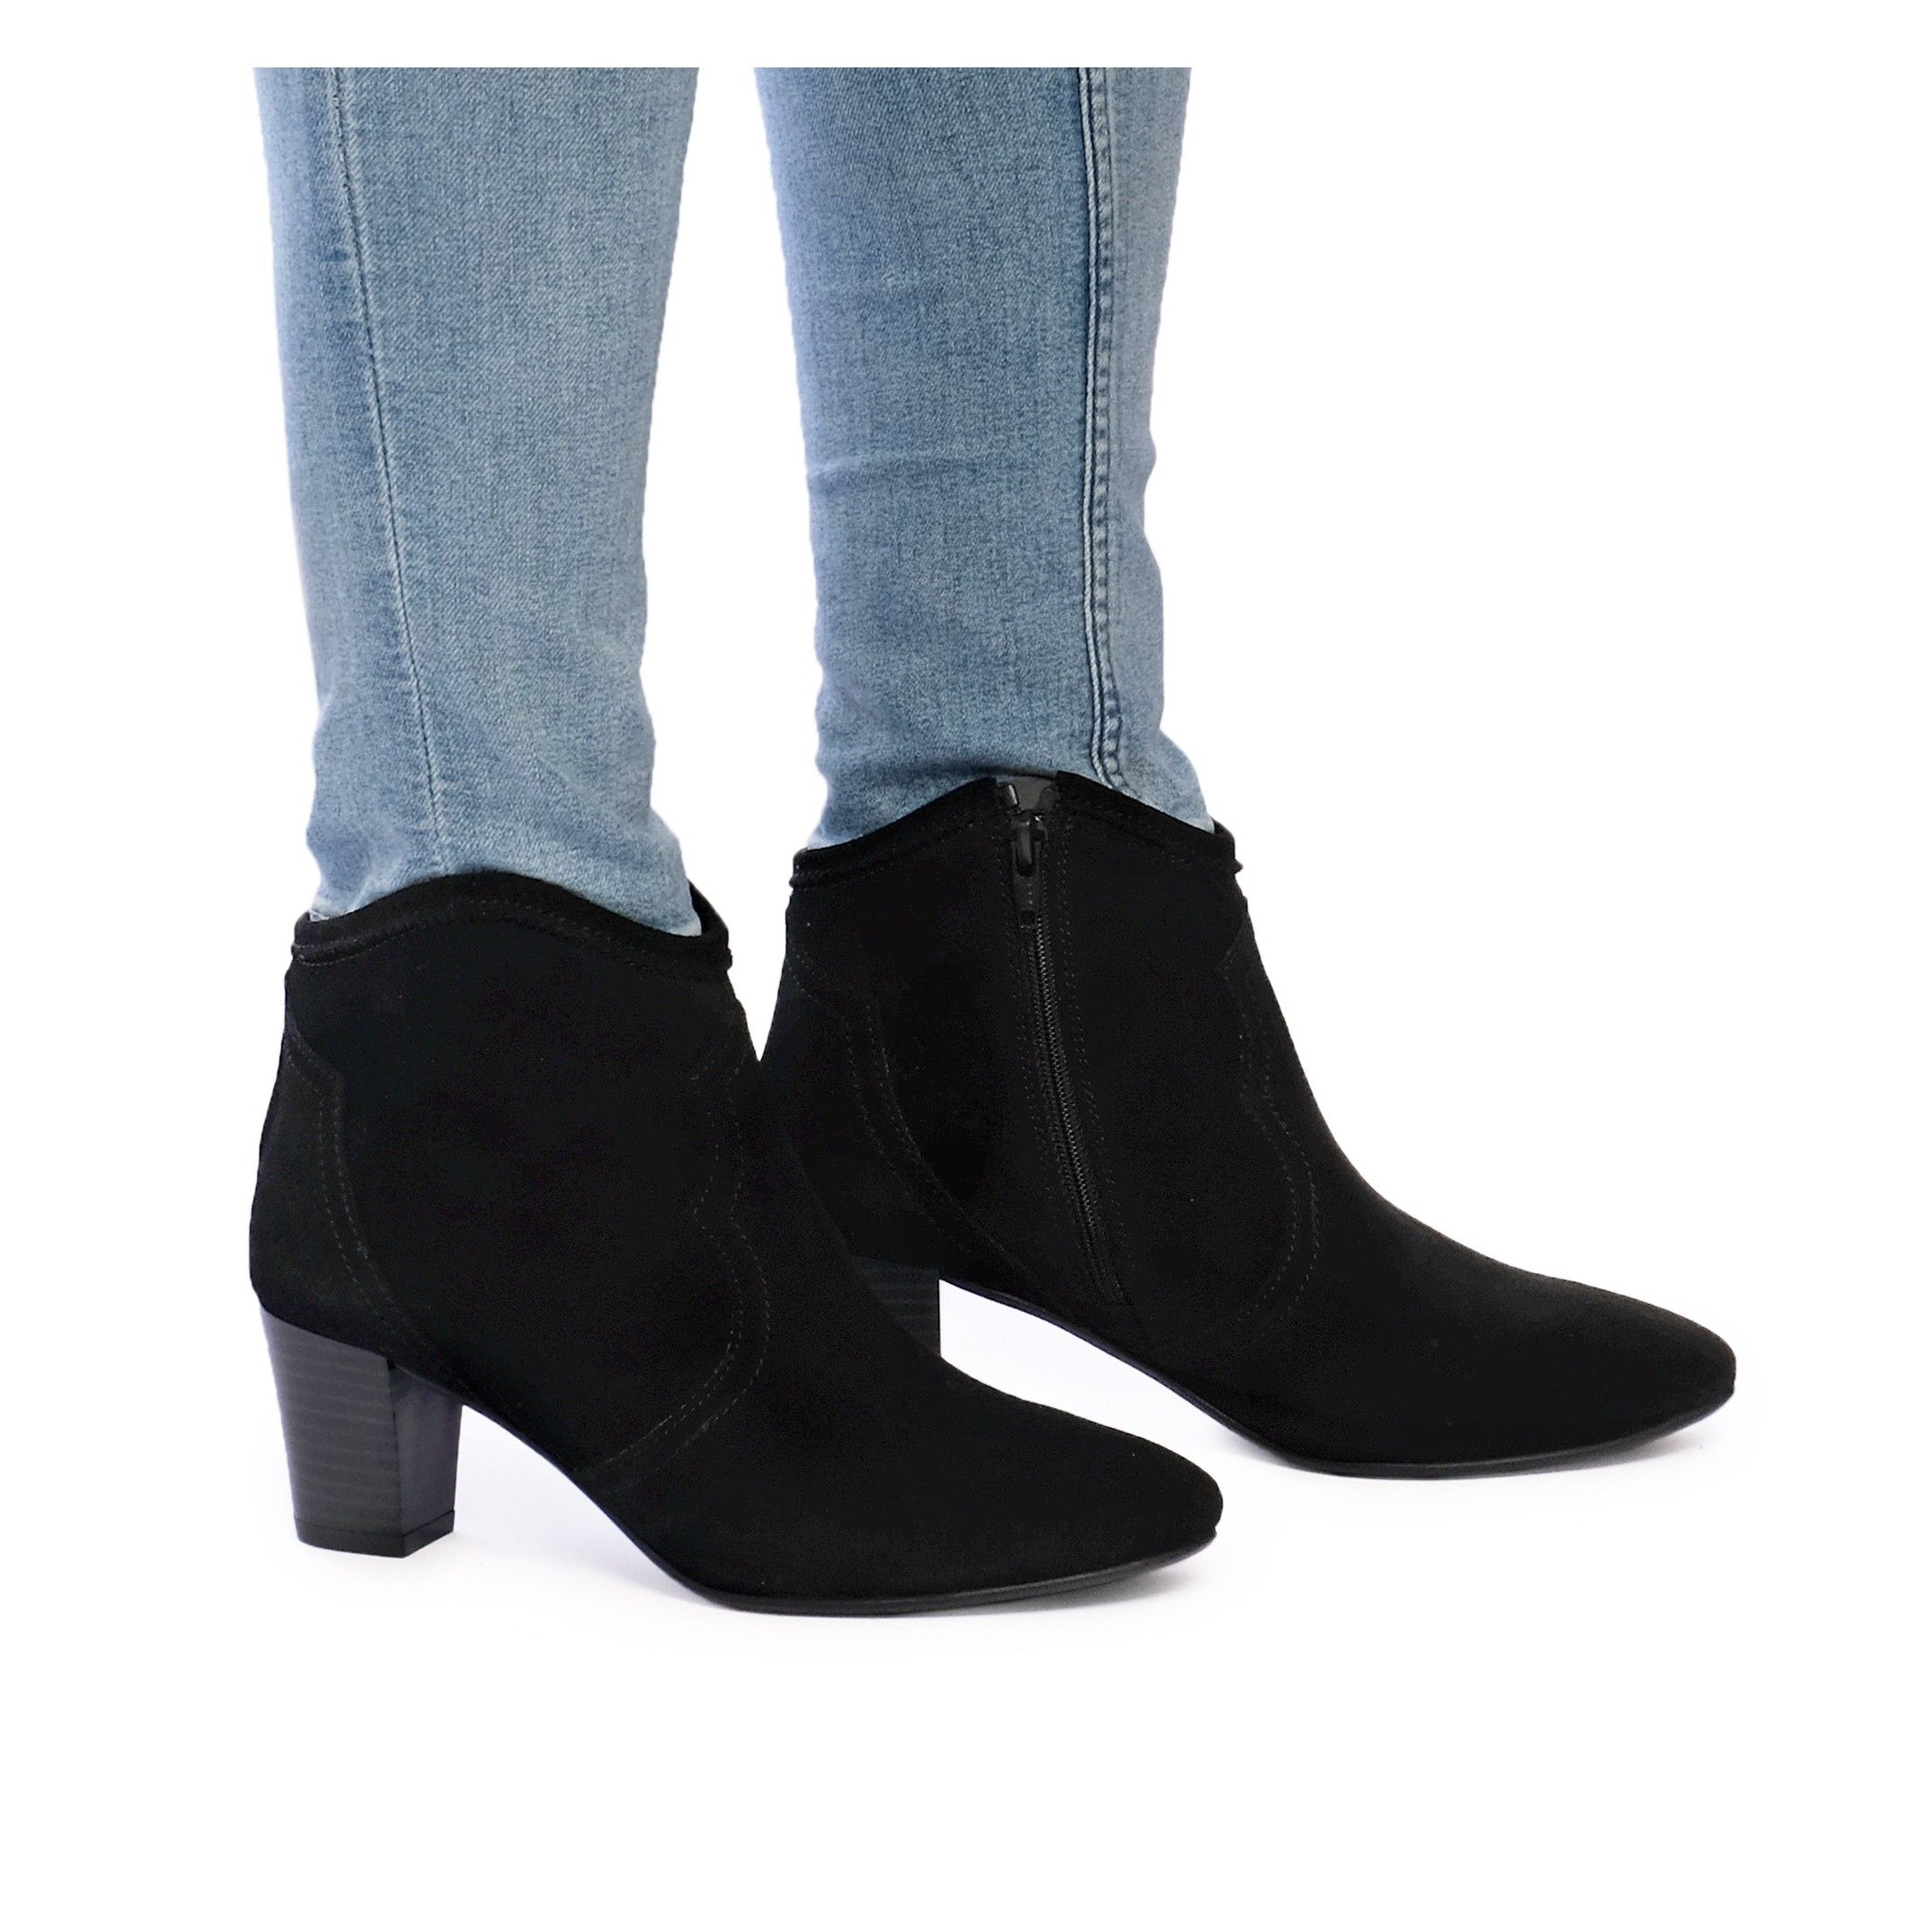 Casual ankle boots with high heel. Zipper closure. Upper, inner and insole made of leather. Heel: 6 cm. Made in Spain.